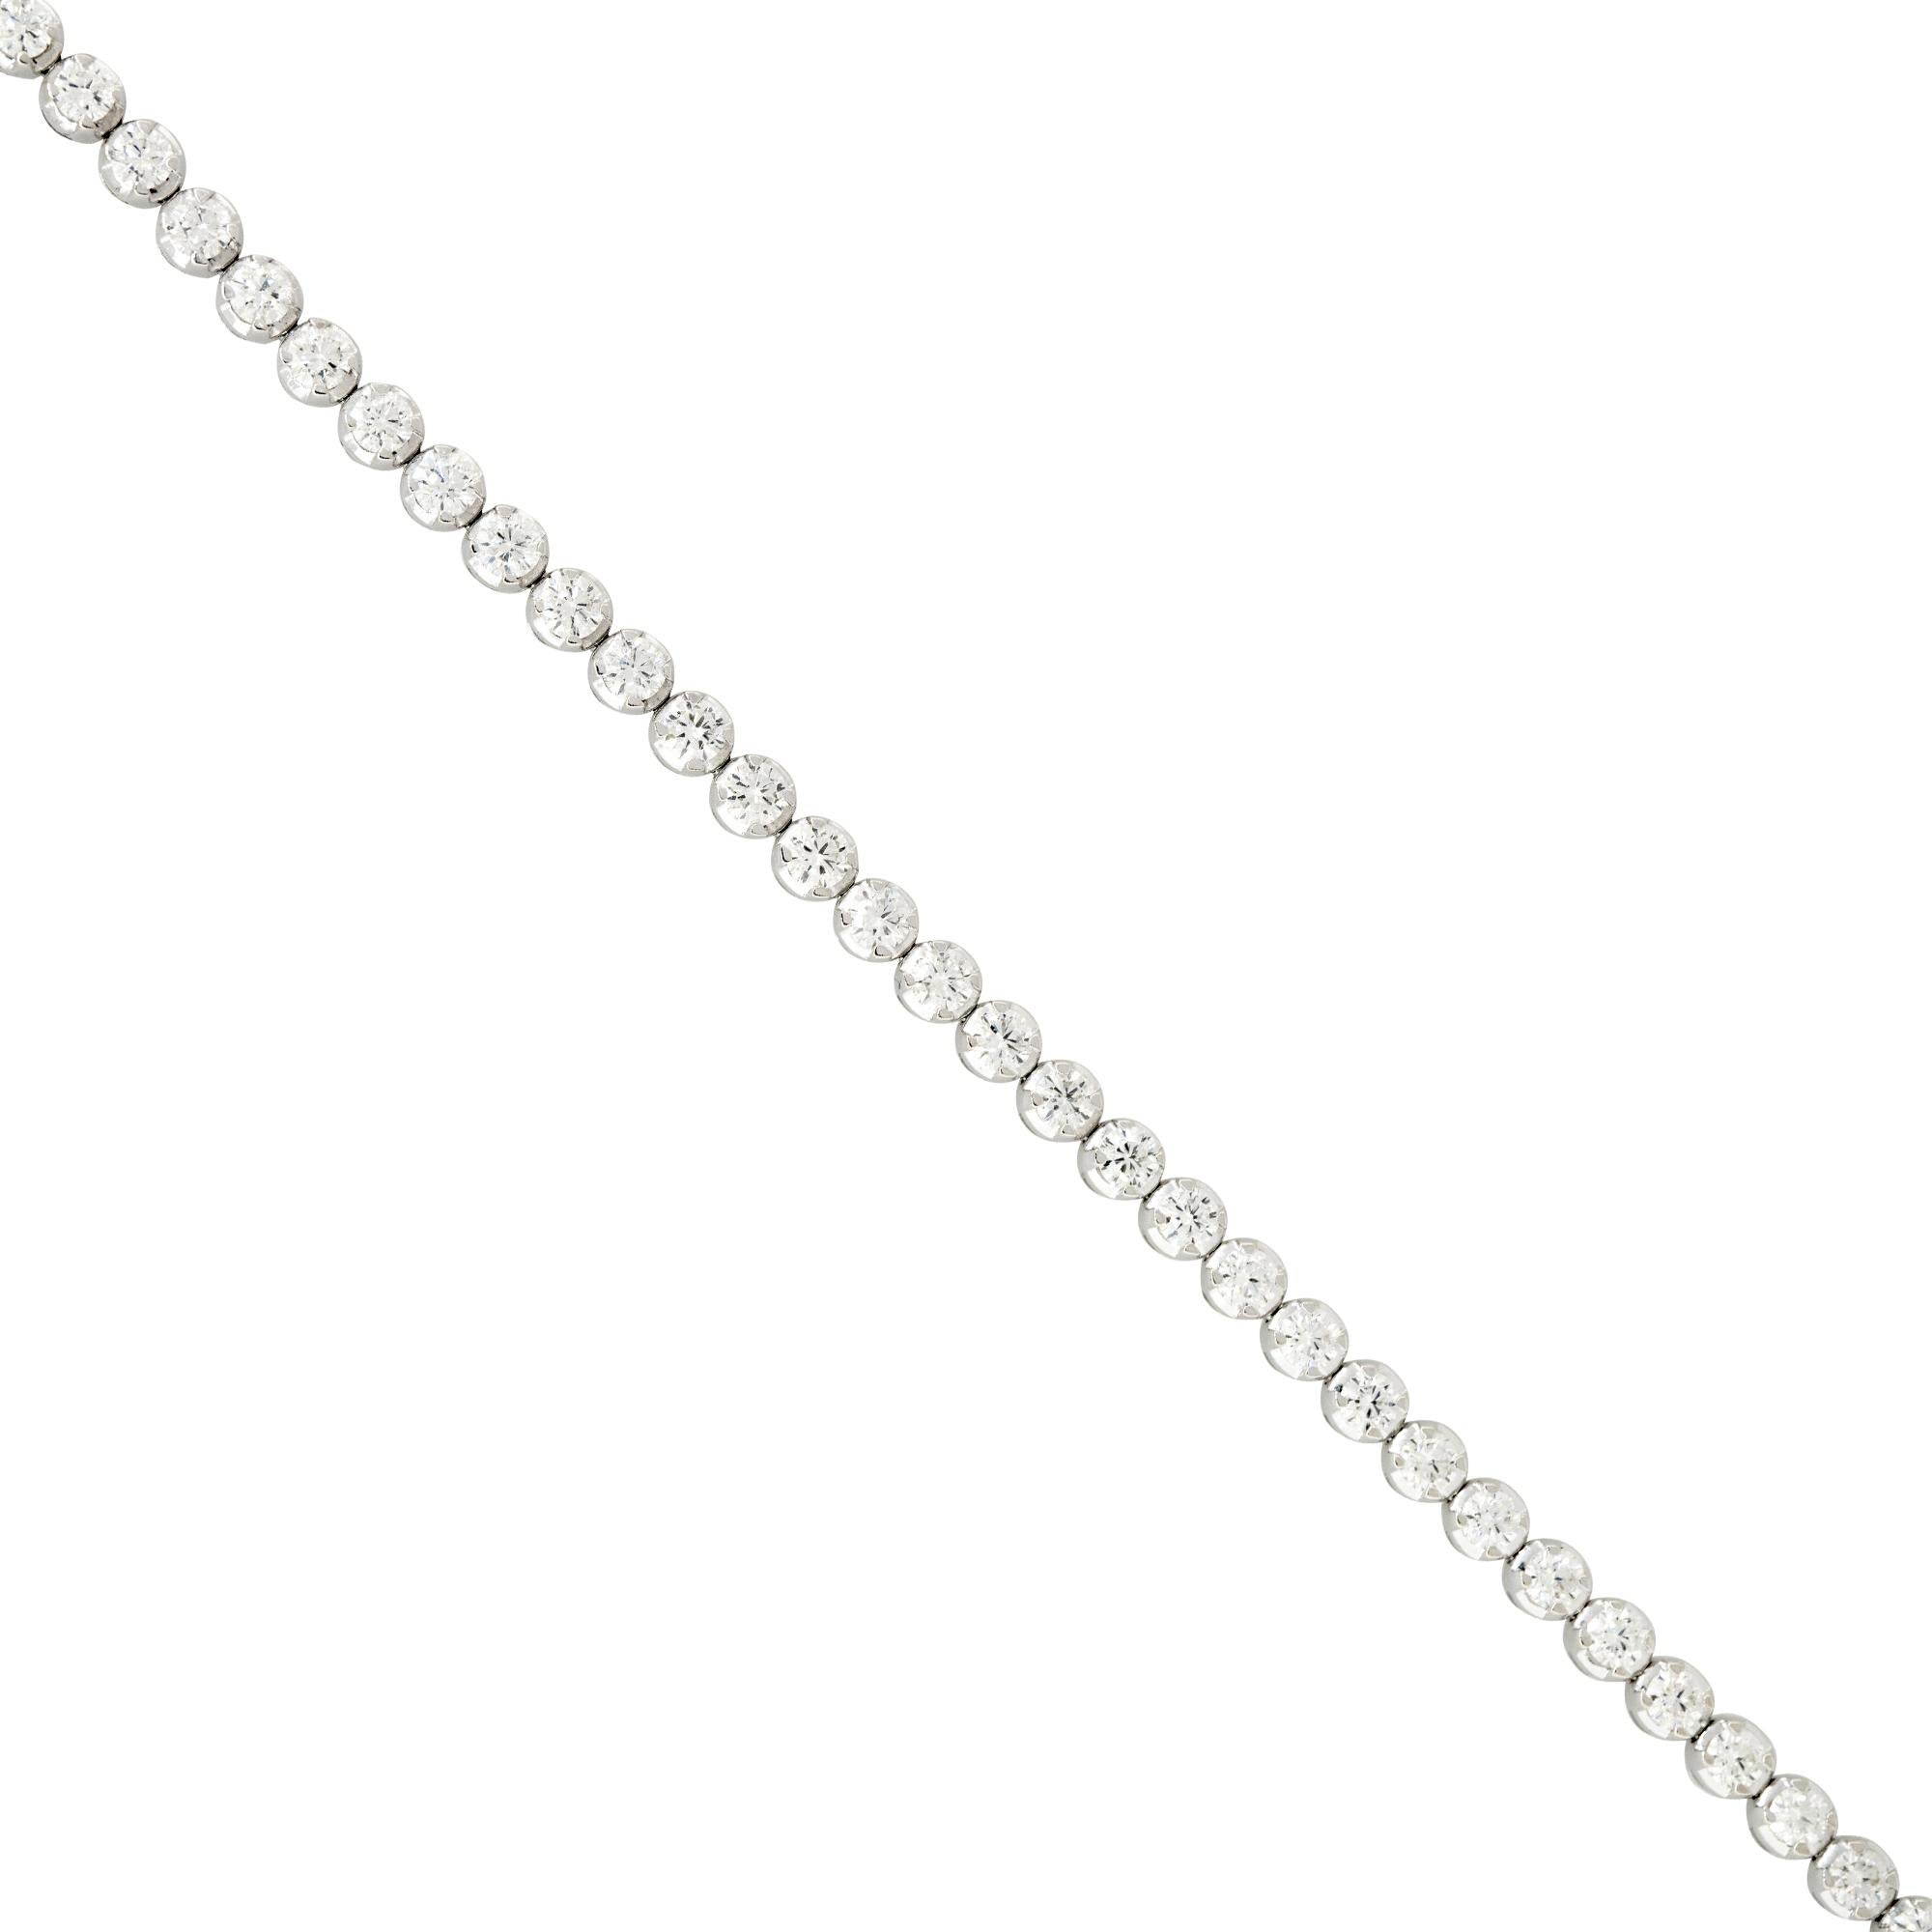 14k White Gold 4.40ctw Round Brilliant Diamond Tennis Bracelet
Material: 14k White Gold
Diamond Details: There are approximately 4.40 carats of Round Brilliant cut Diamonds. Diamonds are approximately H/I in color and approximately SI in clarity.